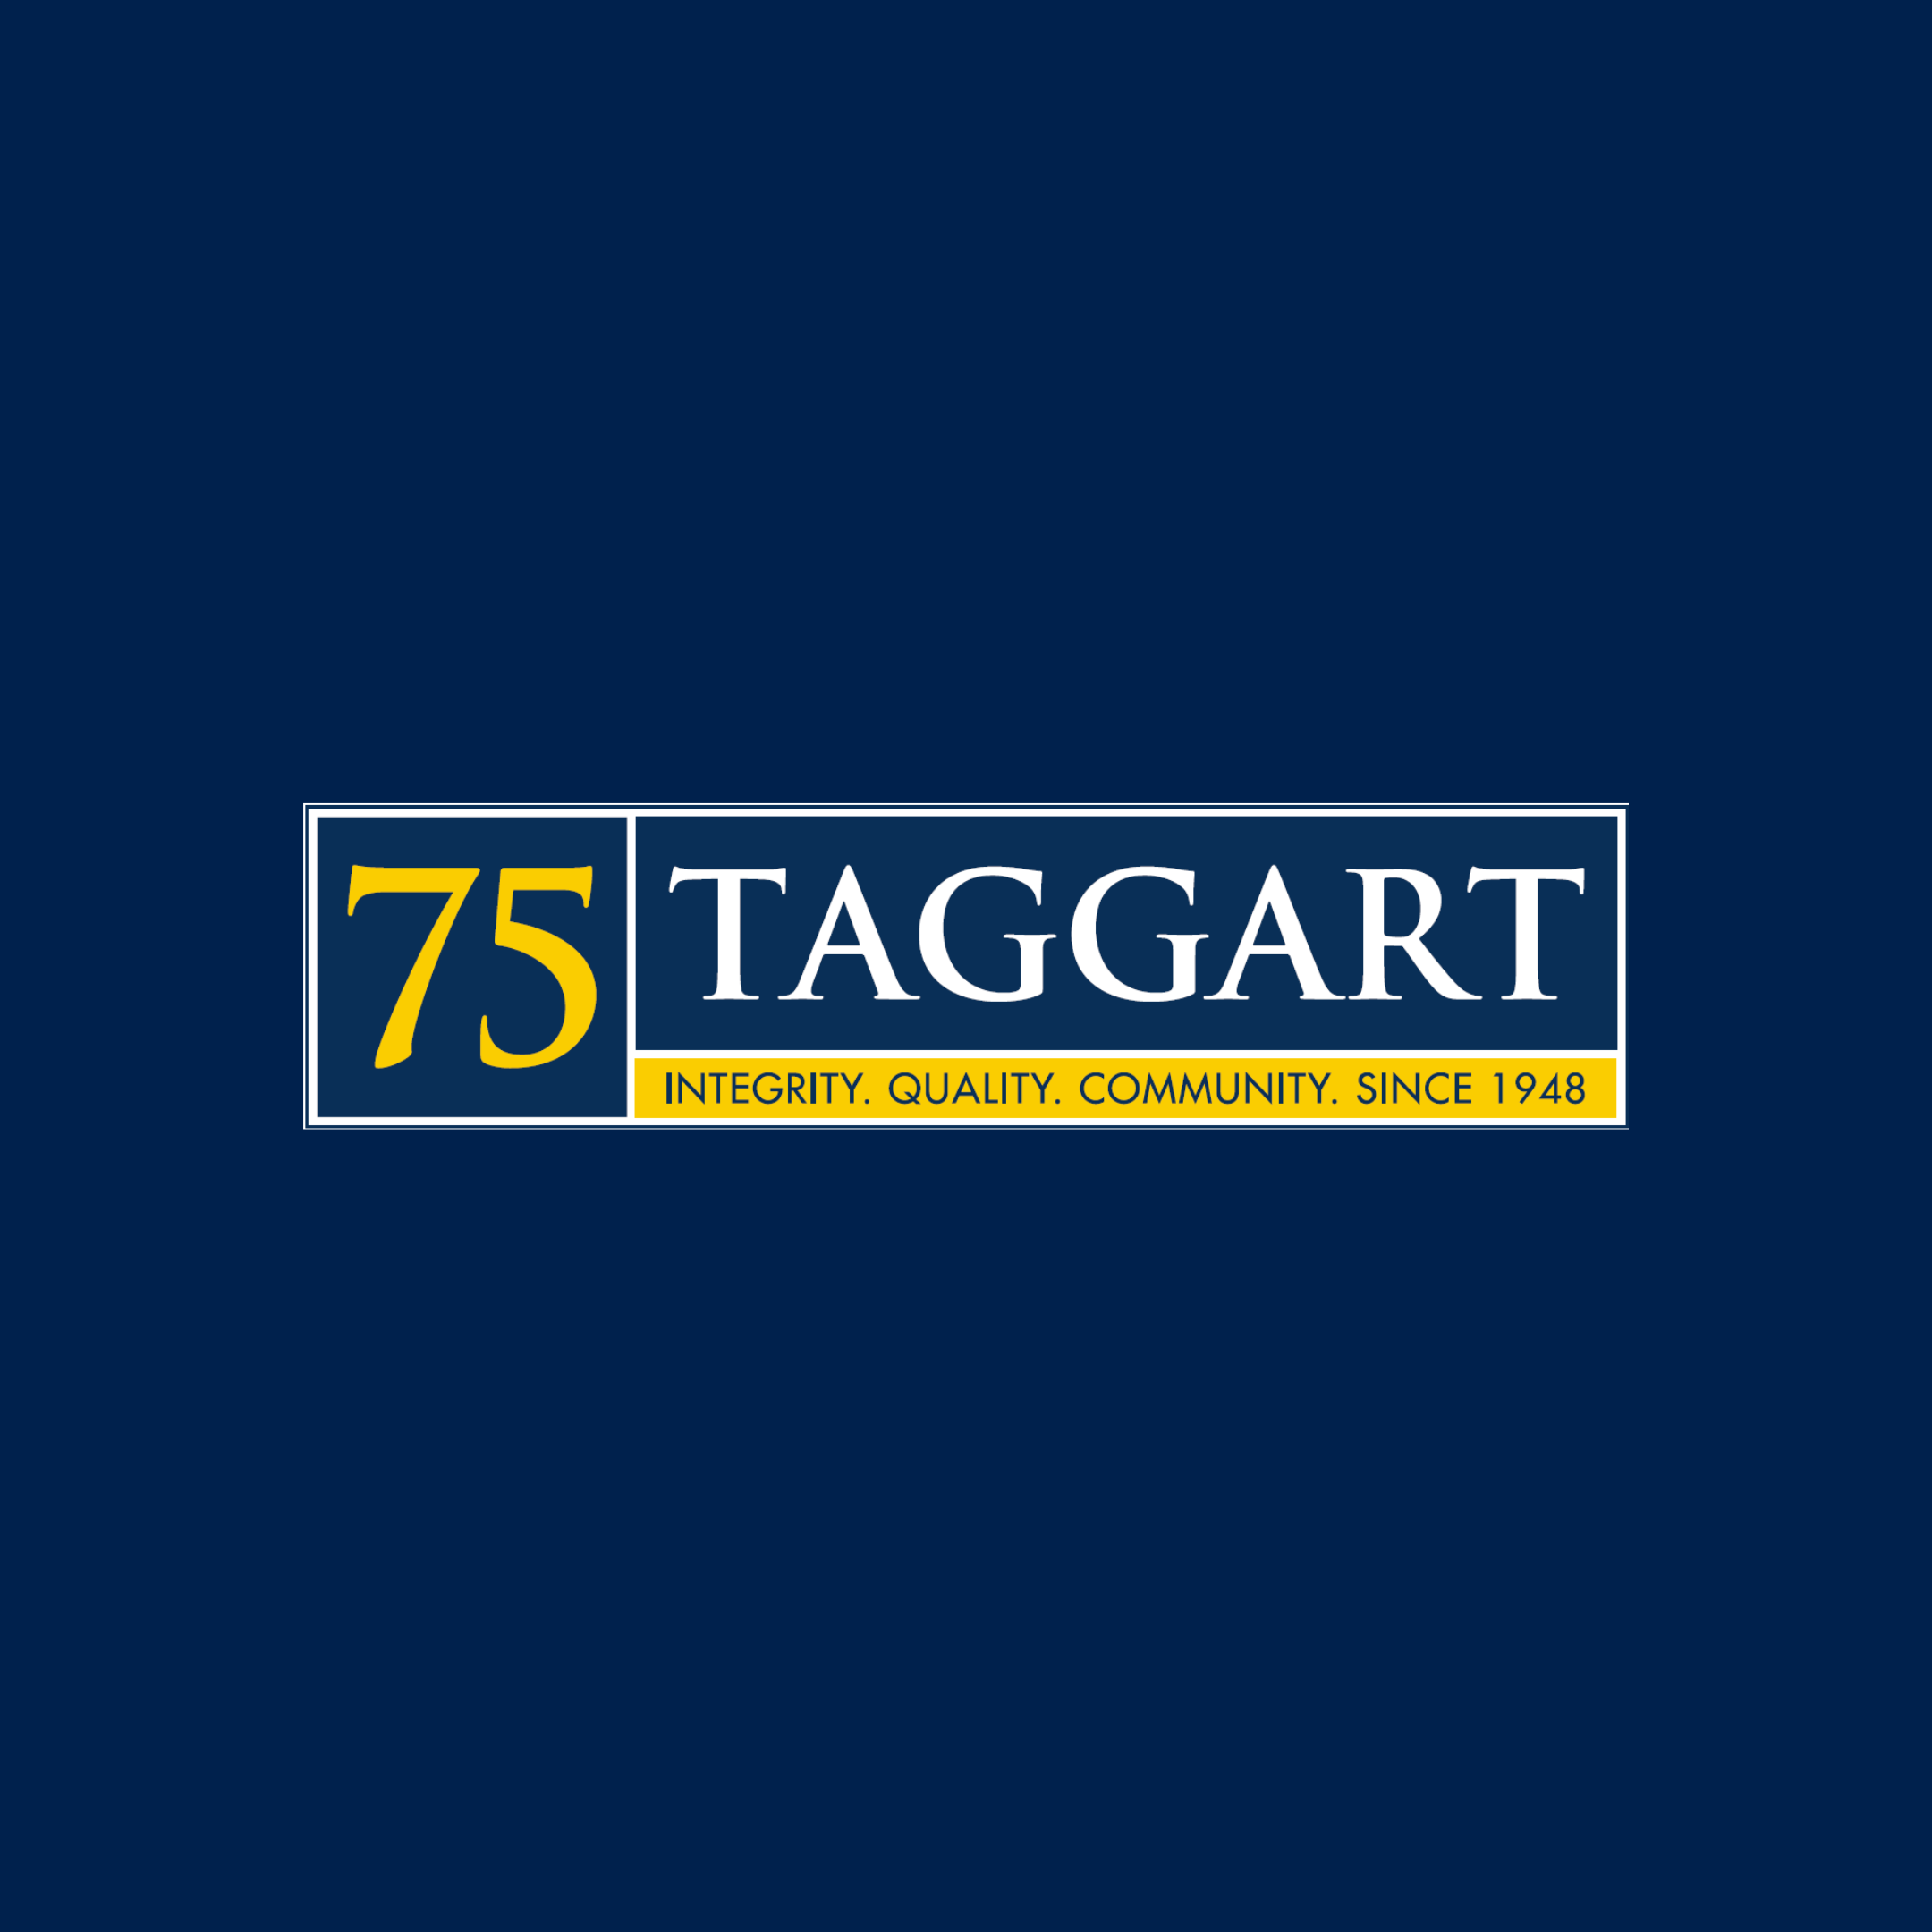 Image representing the celebration of 75 years of Taggart!